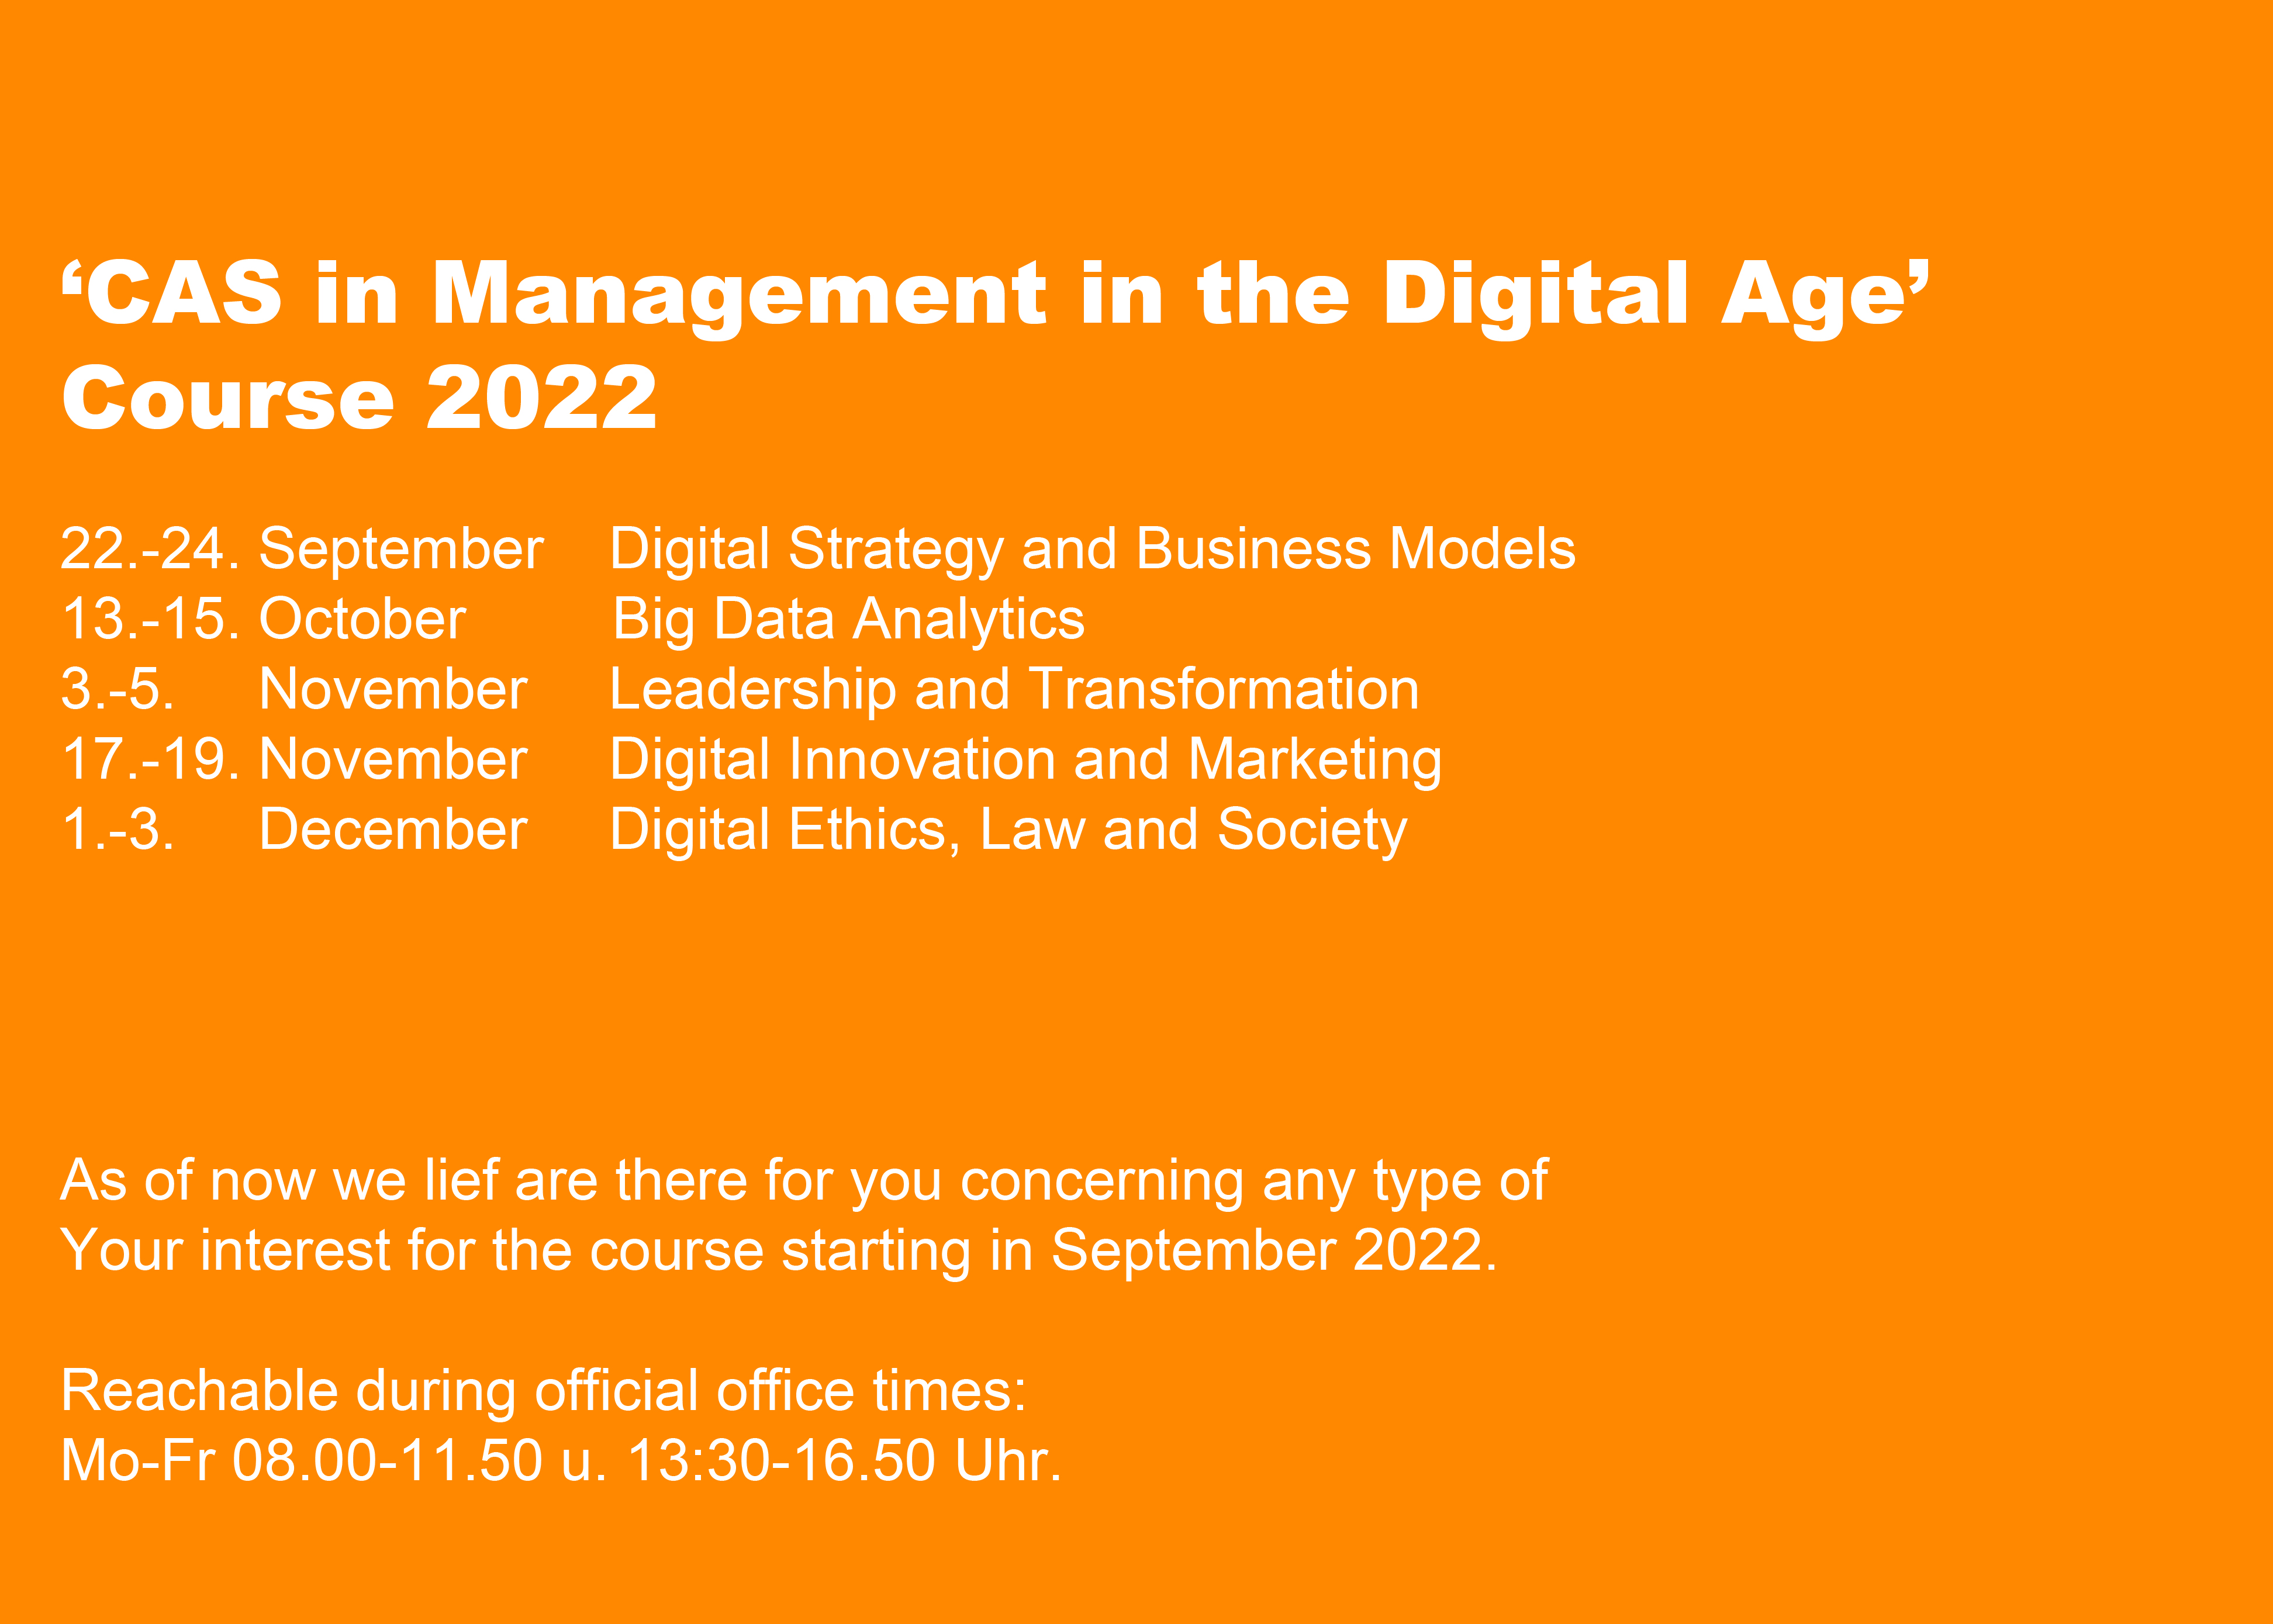 CAS in Management in the Digital Age - Course 2022